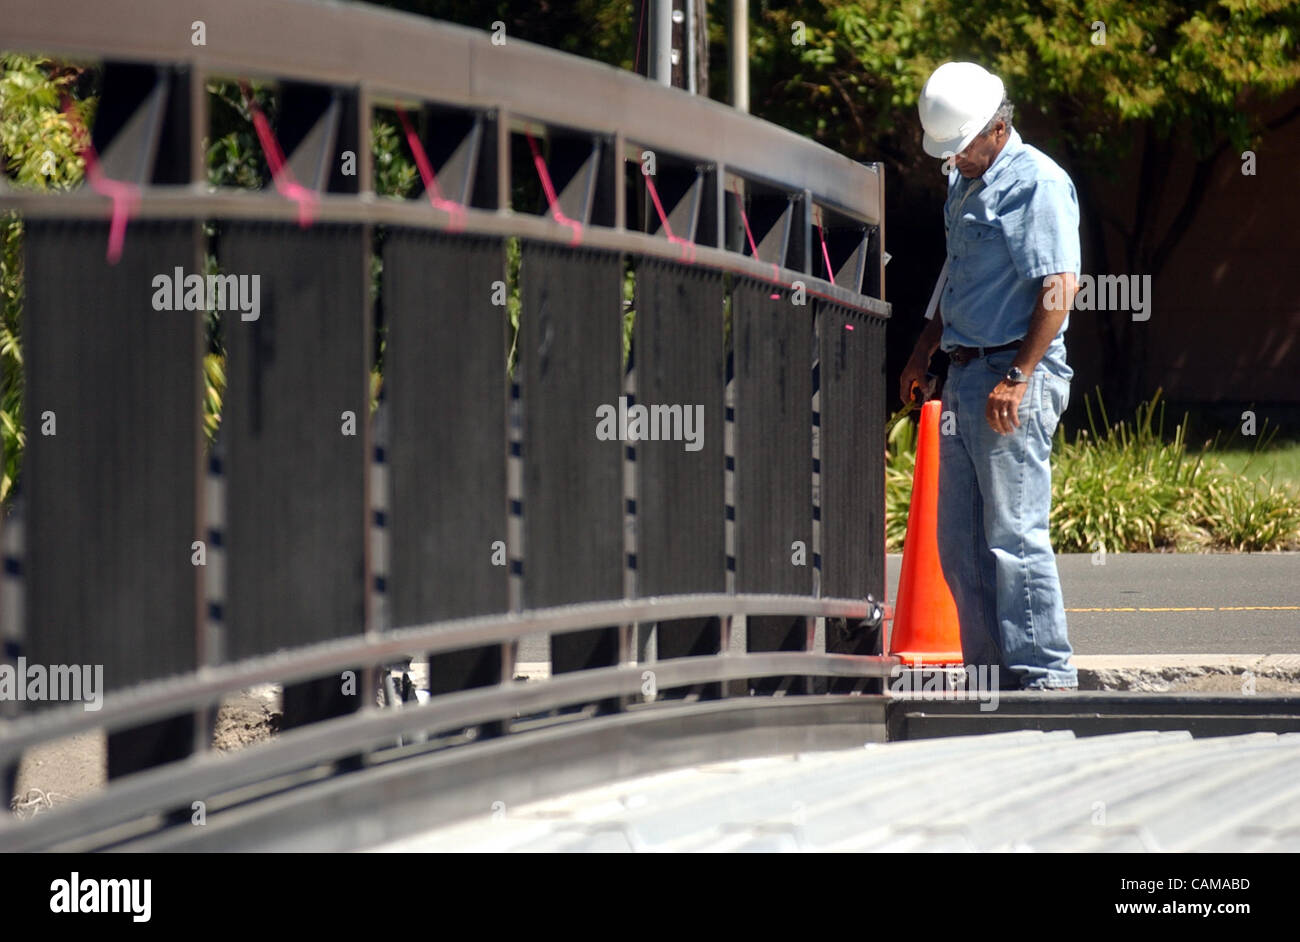 Project Manager Paul Jahanian works on the Prune Street pedestrian bridge, Tuesday, Sept. 4, 2007, in Pinole, Calif. The 84ft. long and 10ft. wide bridge was set down earlier in the day and will be completely installed in the coming weeks.   (Joanna Jhanda/Contra Costa Times) Stock Photo